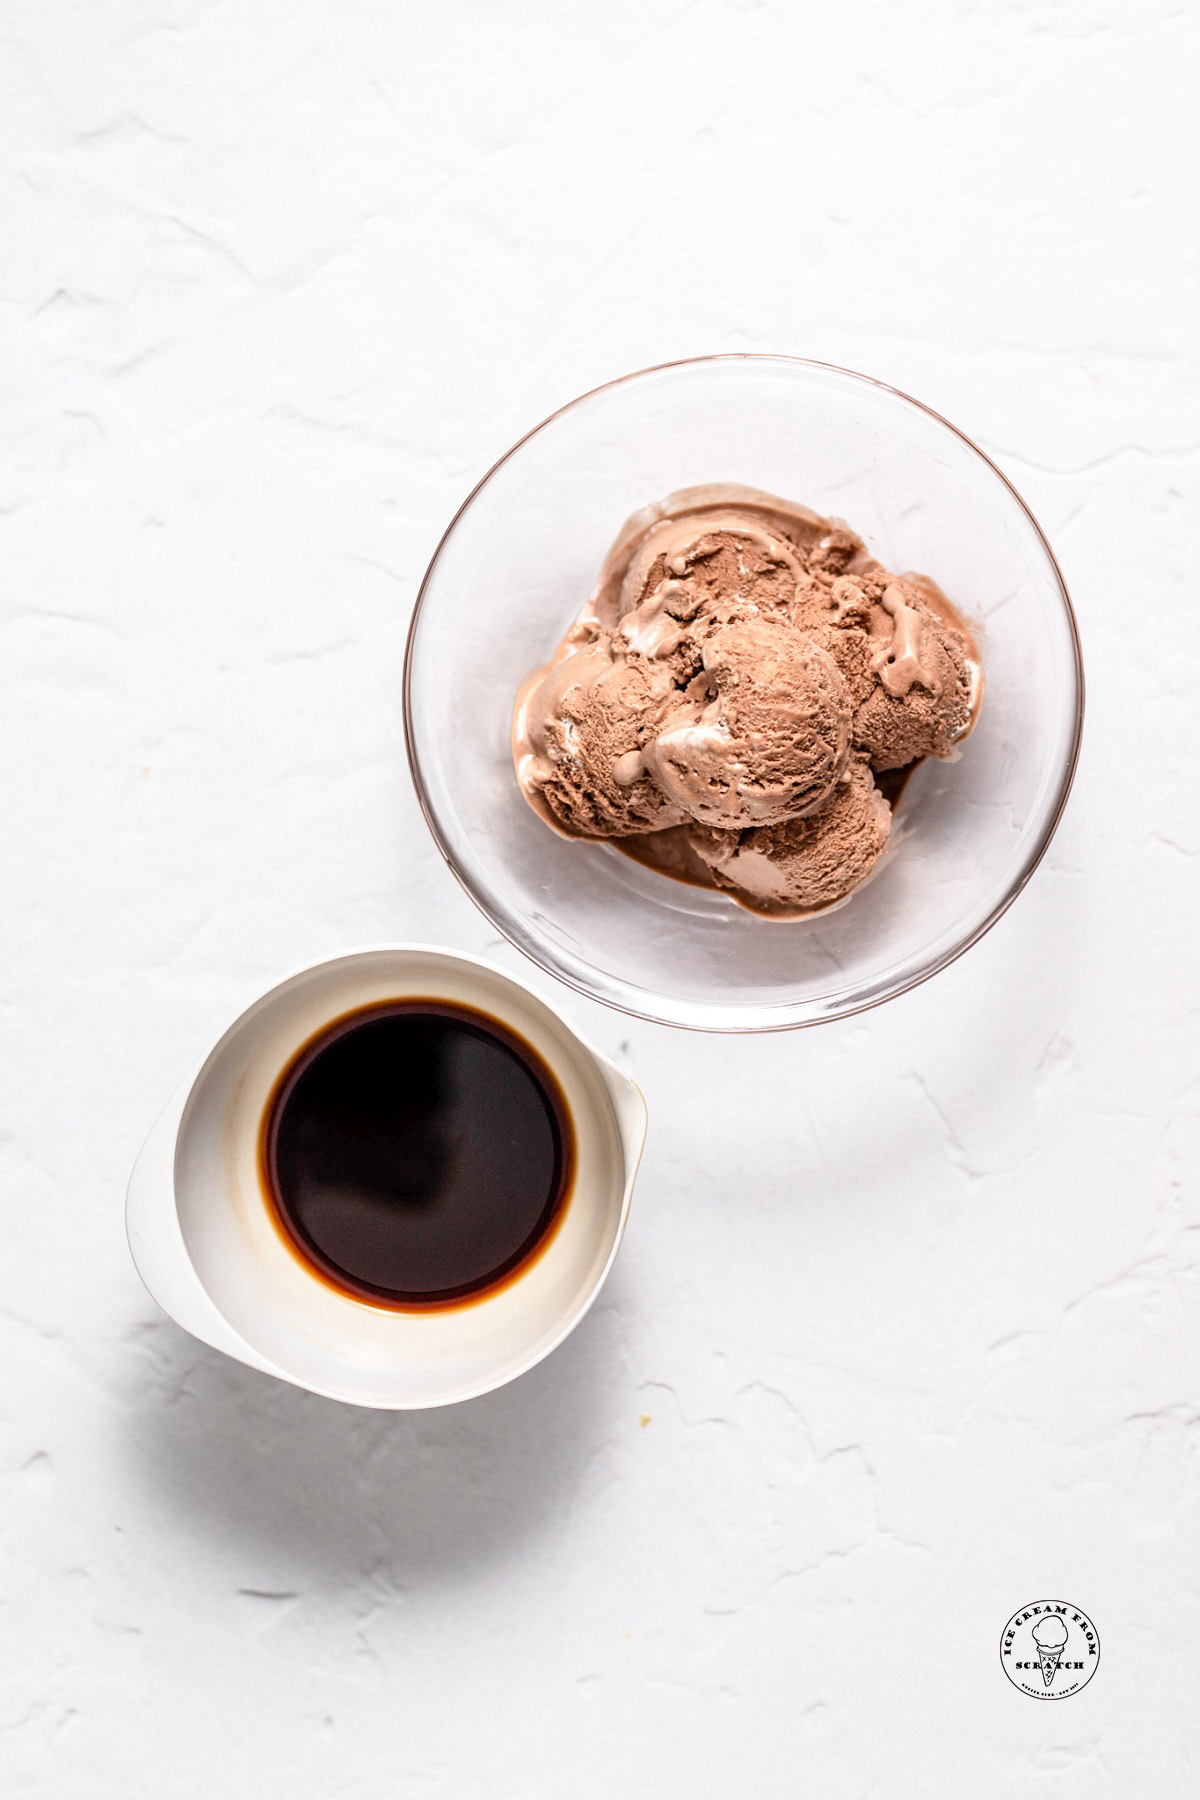 A clear glass bowl of chocolate ice cream, and a small white bowl of dark coffee.